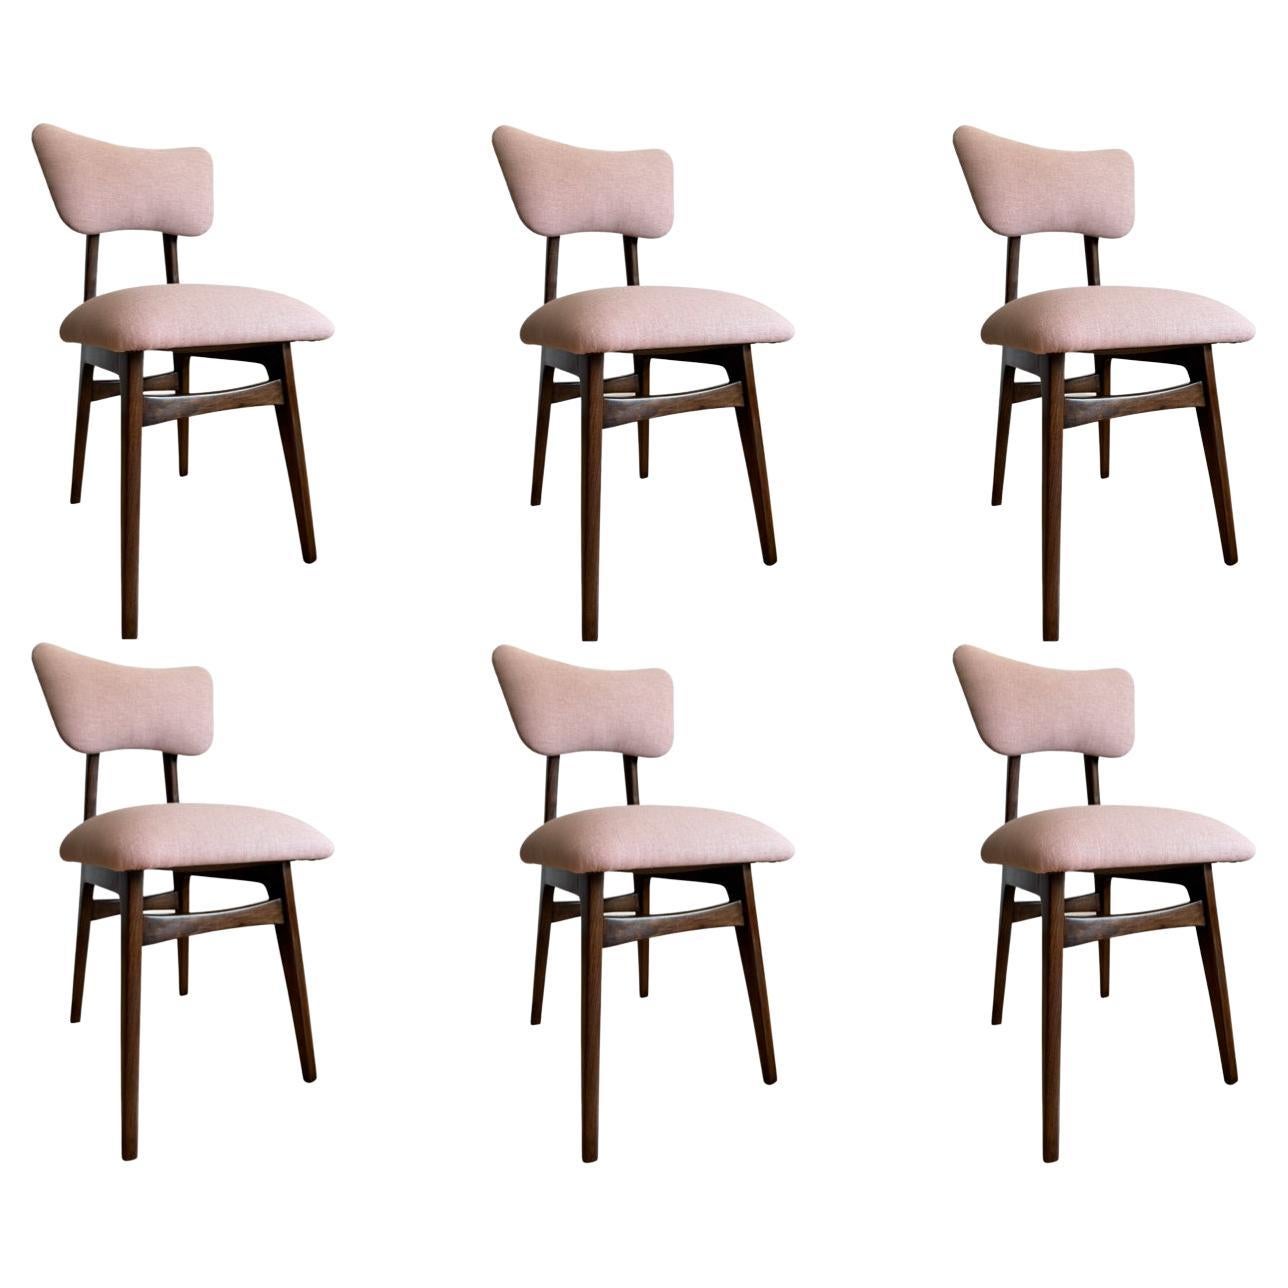 Set of 6 Midcentury Light Pink Dining Chairs, Europe, 1960s